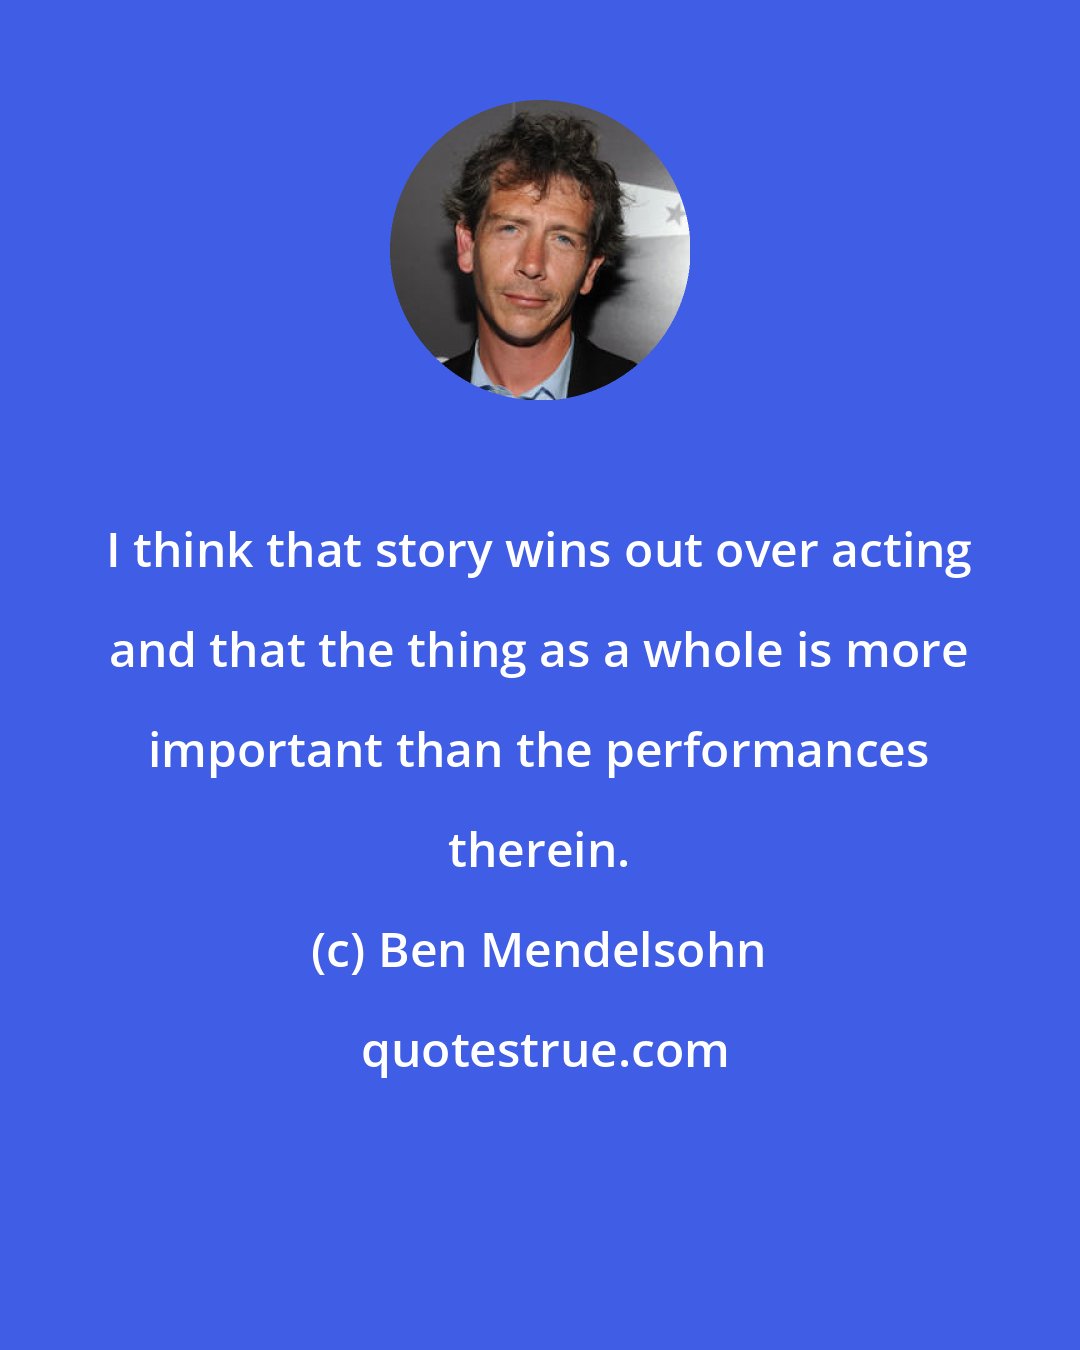 Ben Mendelsohn: I think that story wins out over acting and that the thing as a whole is more important than the performances therein.